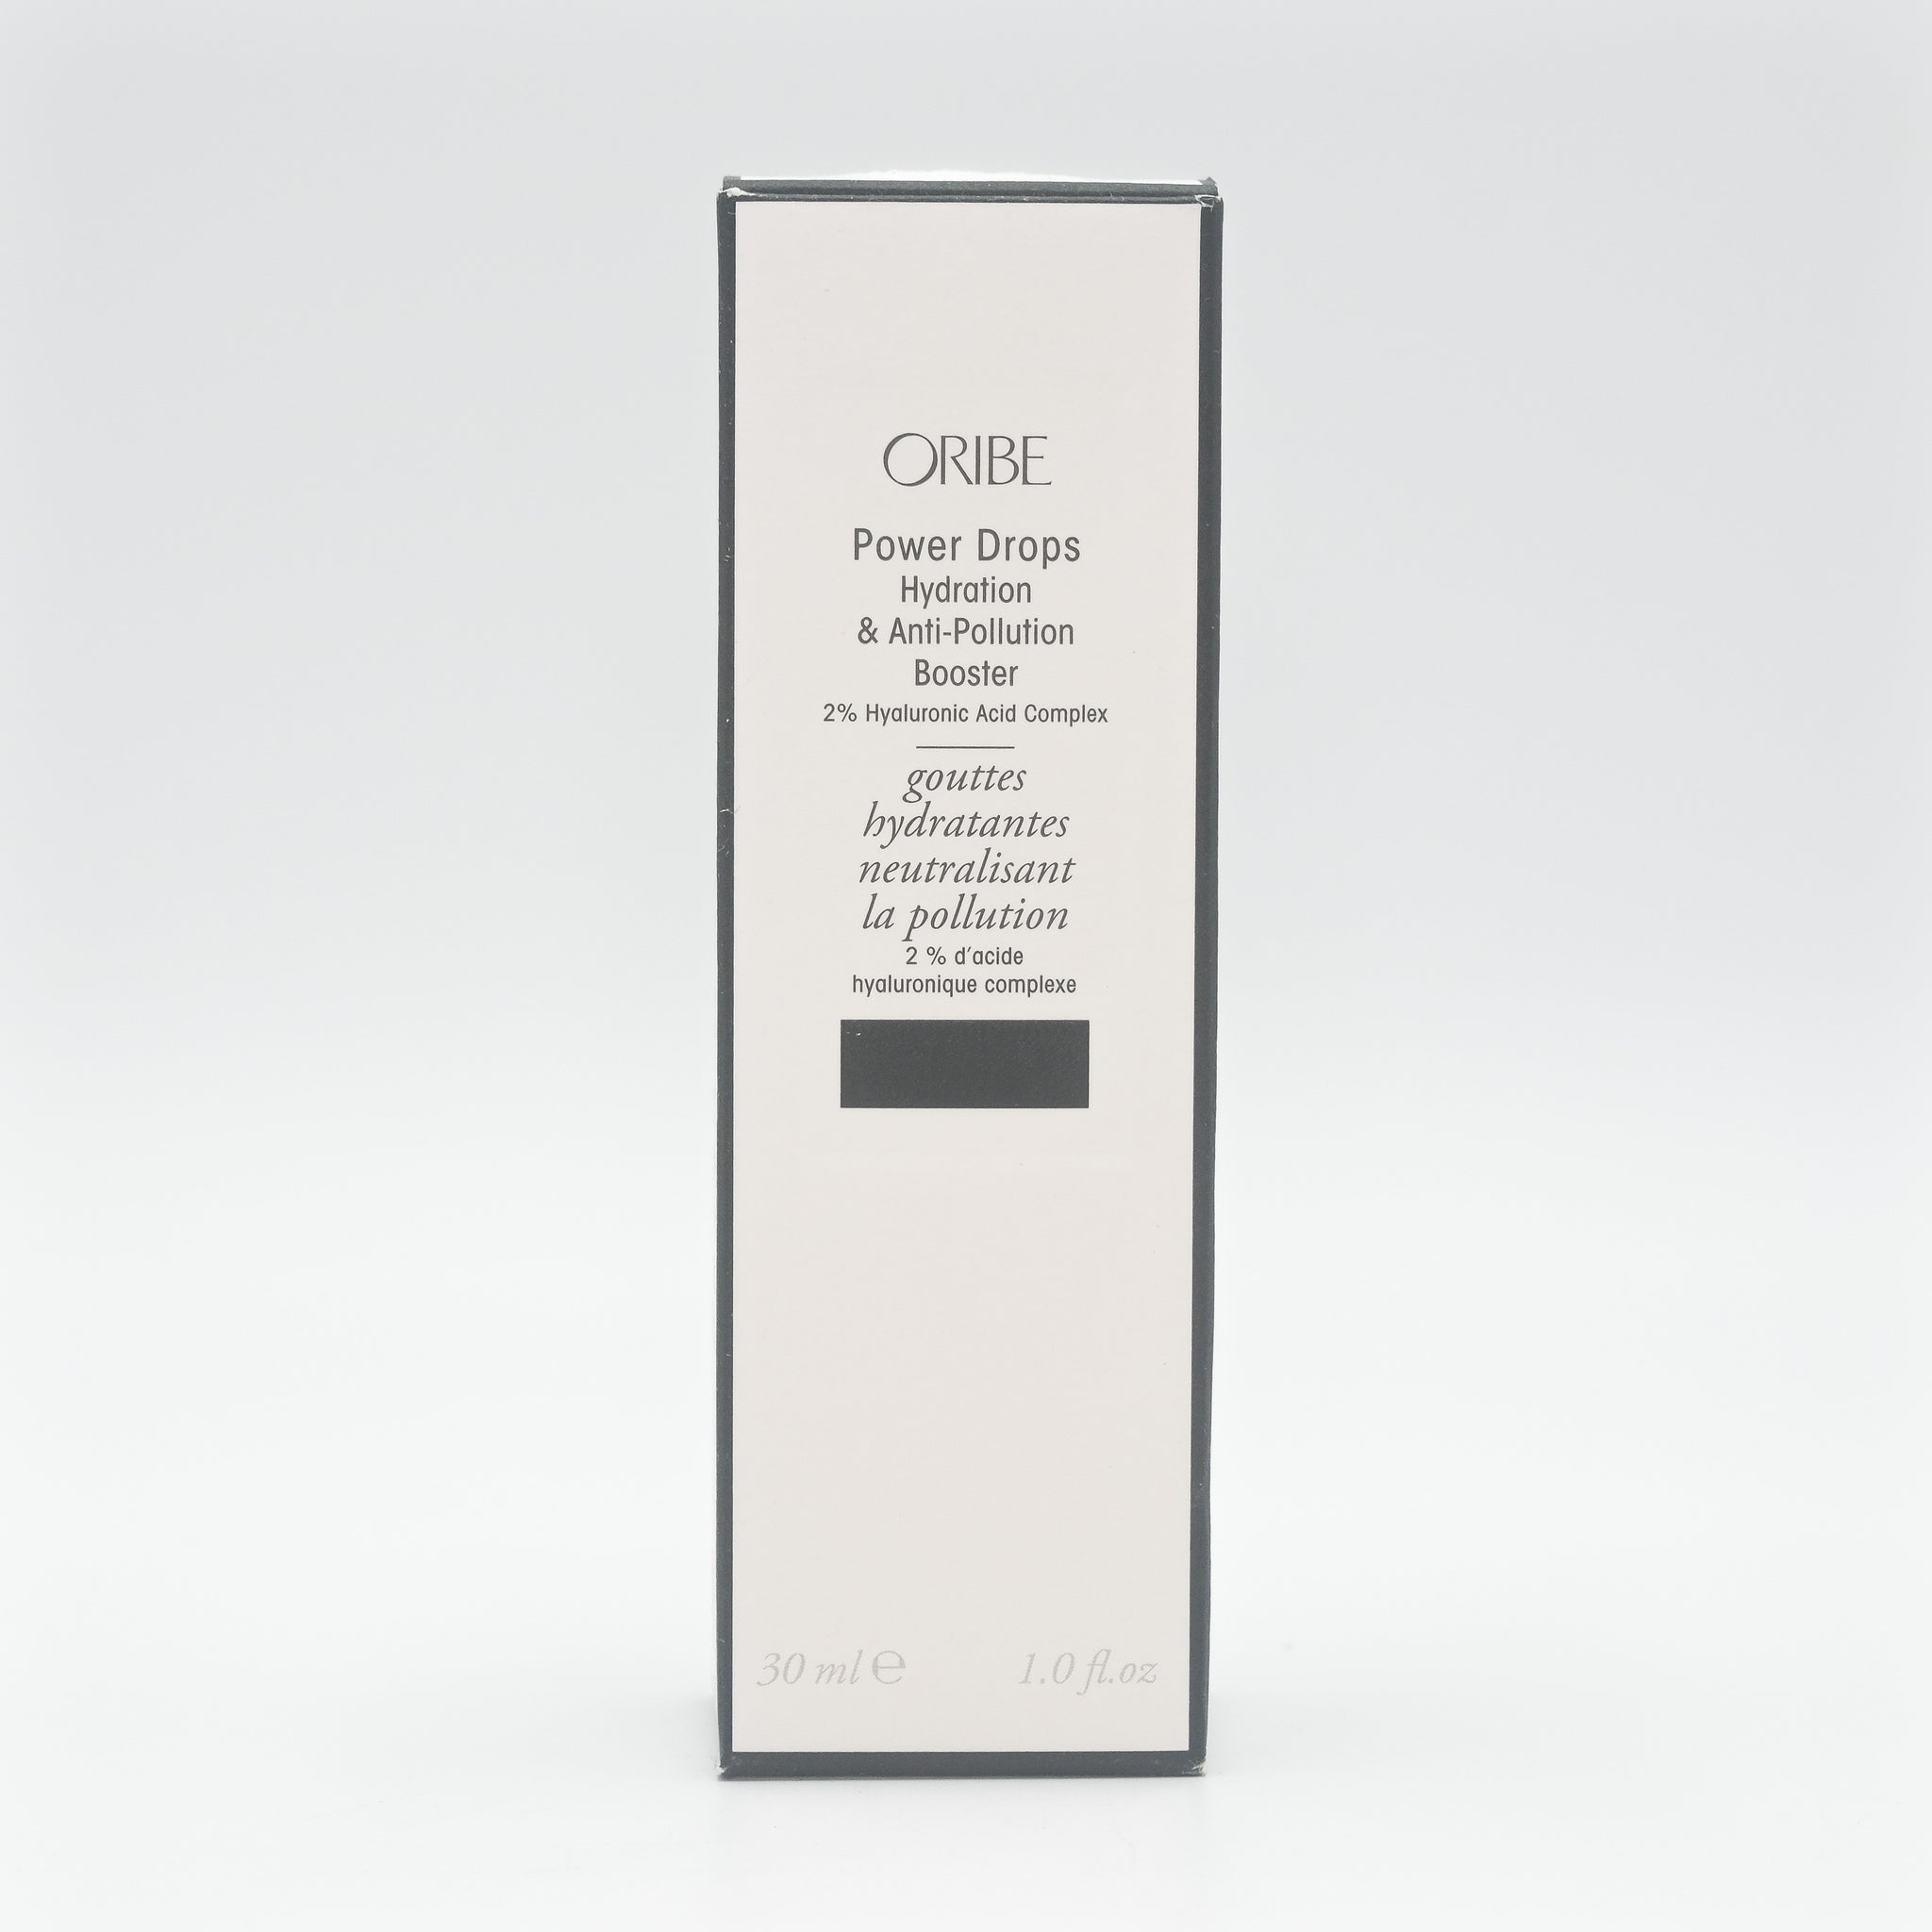 ORIBE Power Drops Hydration & Anti-Pollution Booster 1 oz